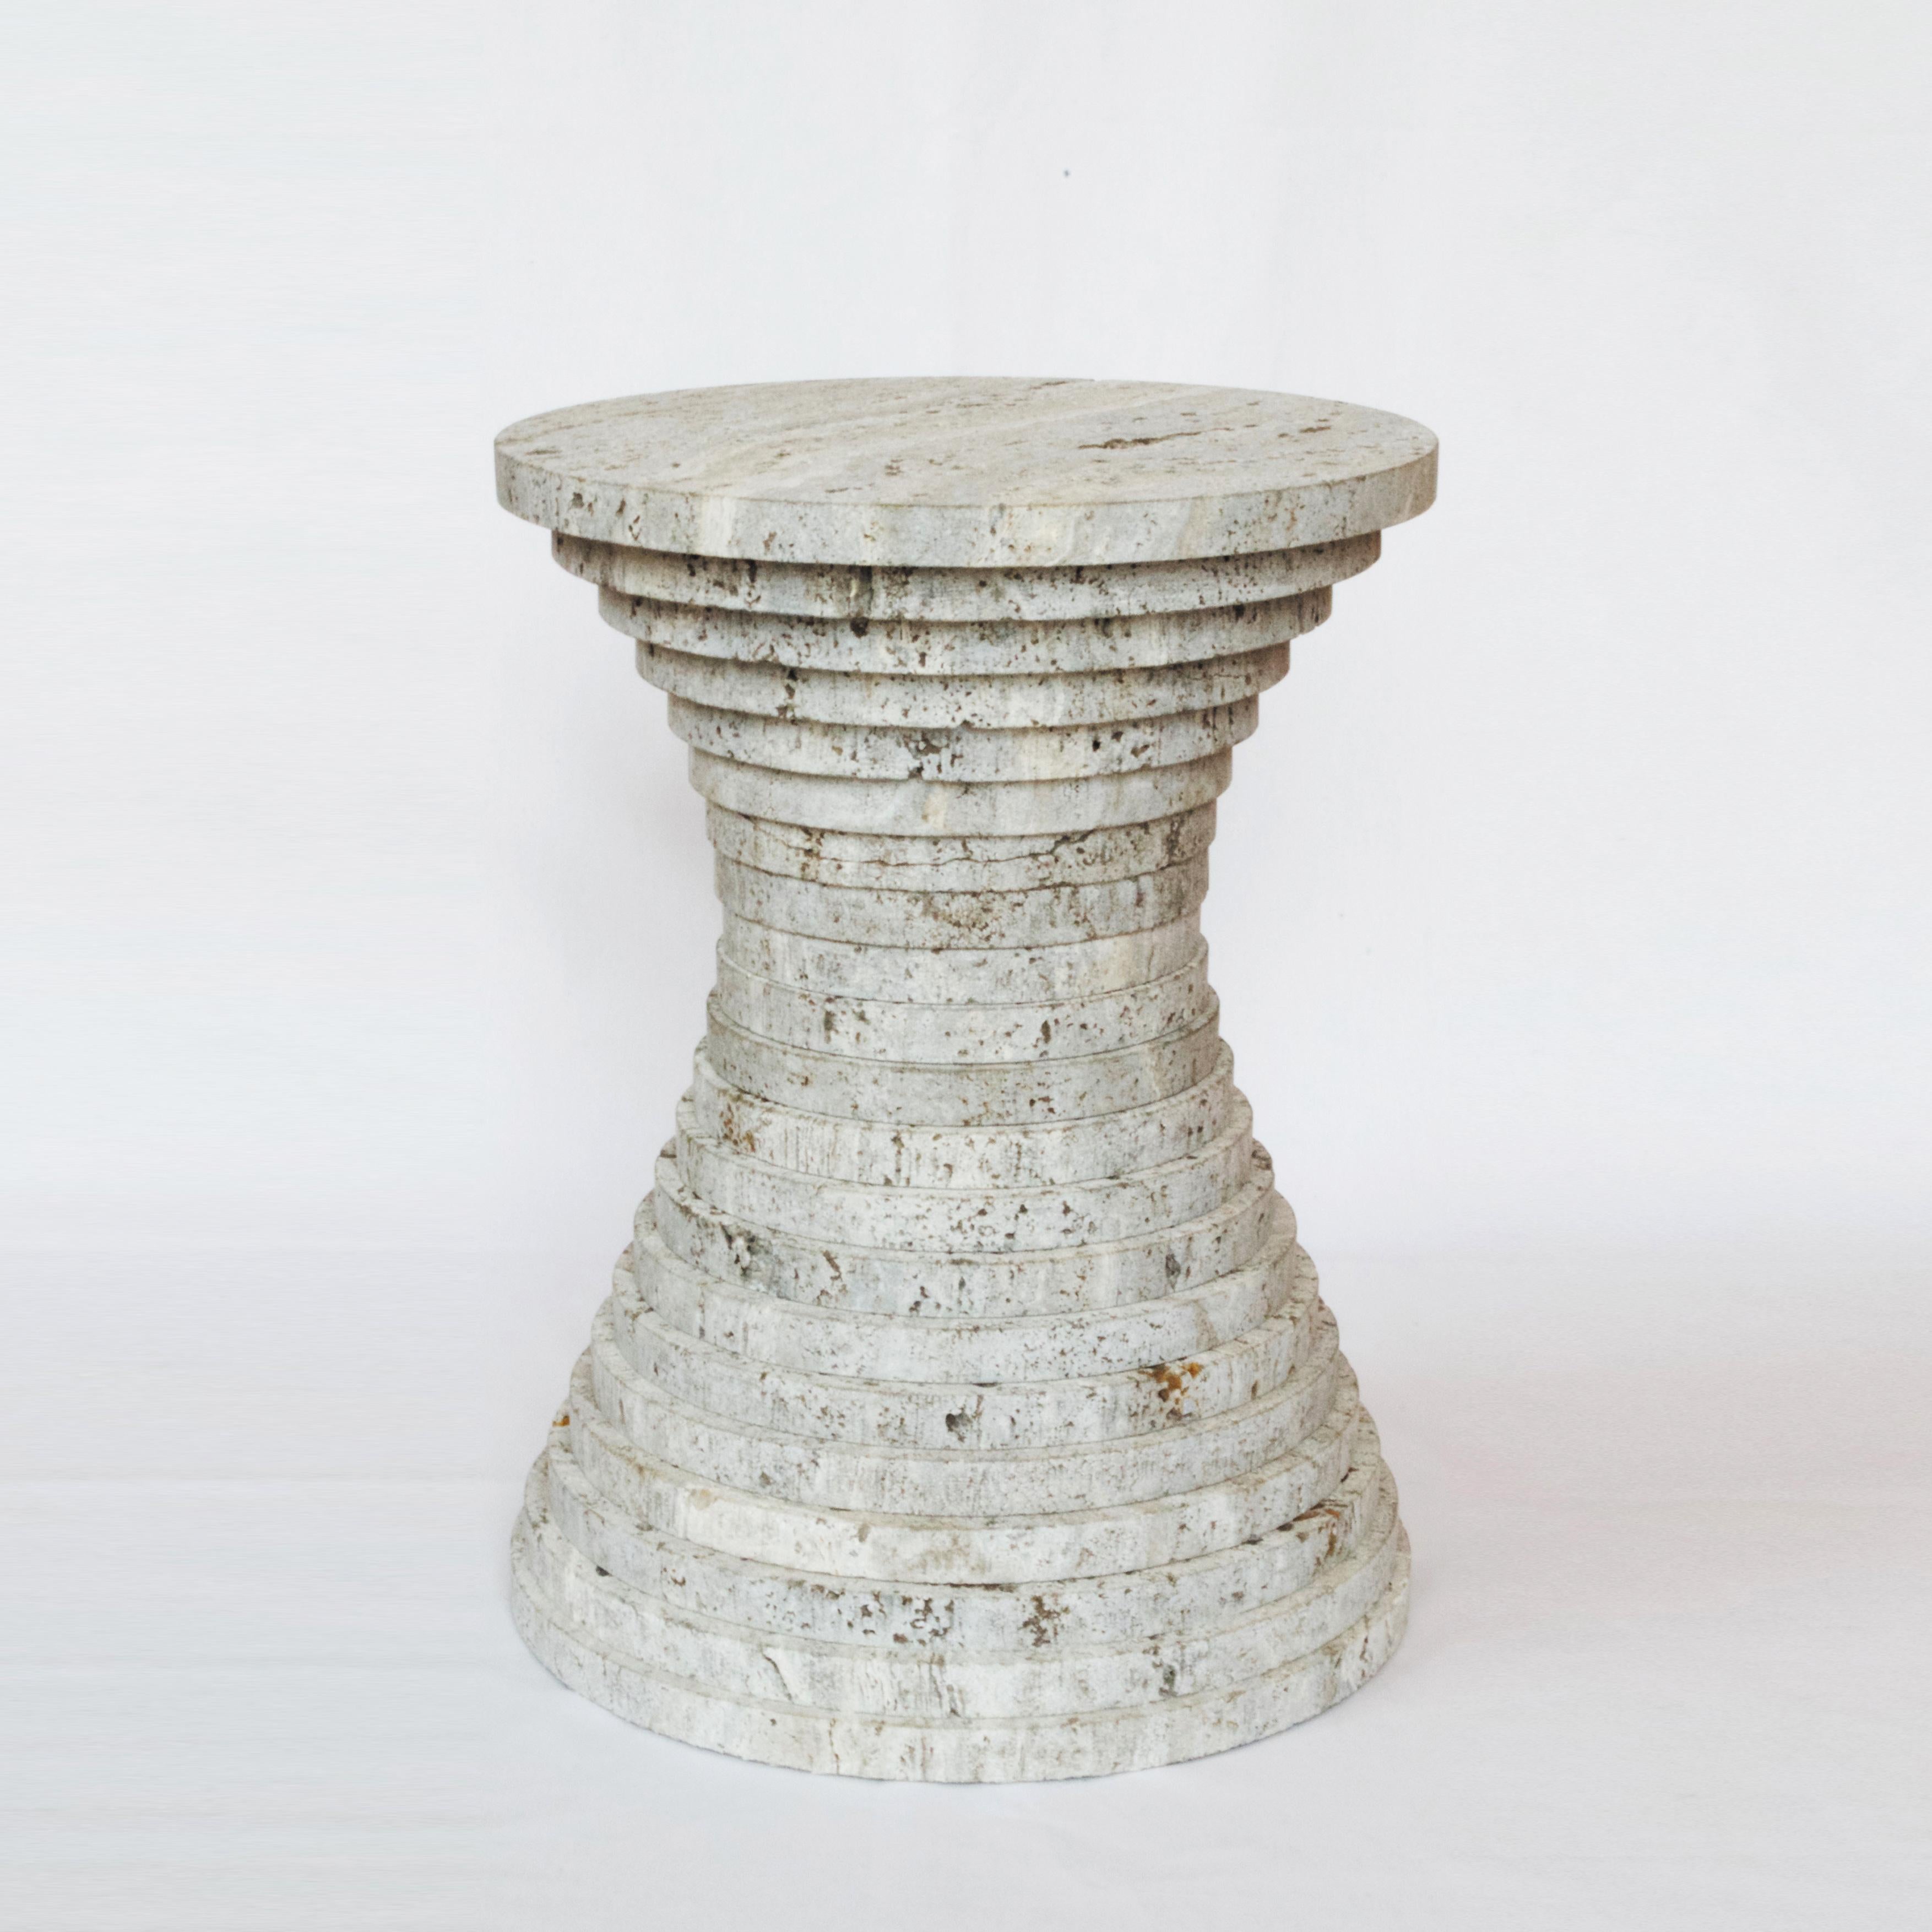 Stratum Basim Marble Stool by Daan De Wit
Numbered Edition
Dimensions: D 30 x H 42 cm.
Materials: Titanium Traverine.
16 kg
Also available in other materials.

This time the focus is on marble and more specifically the costly and irreversible waste